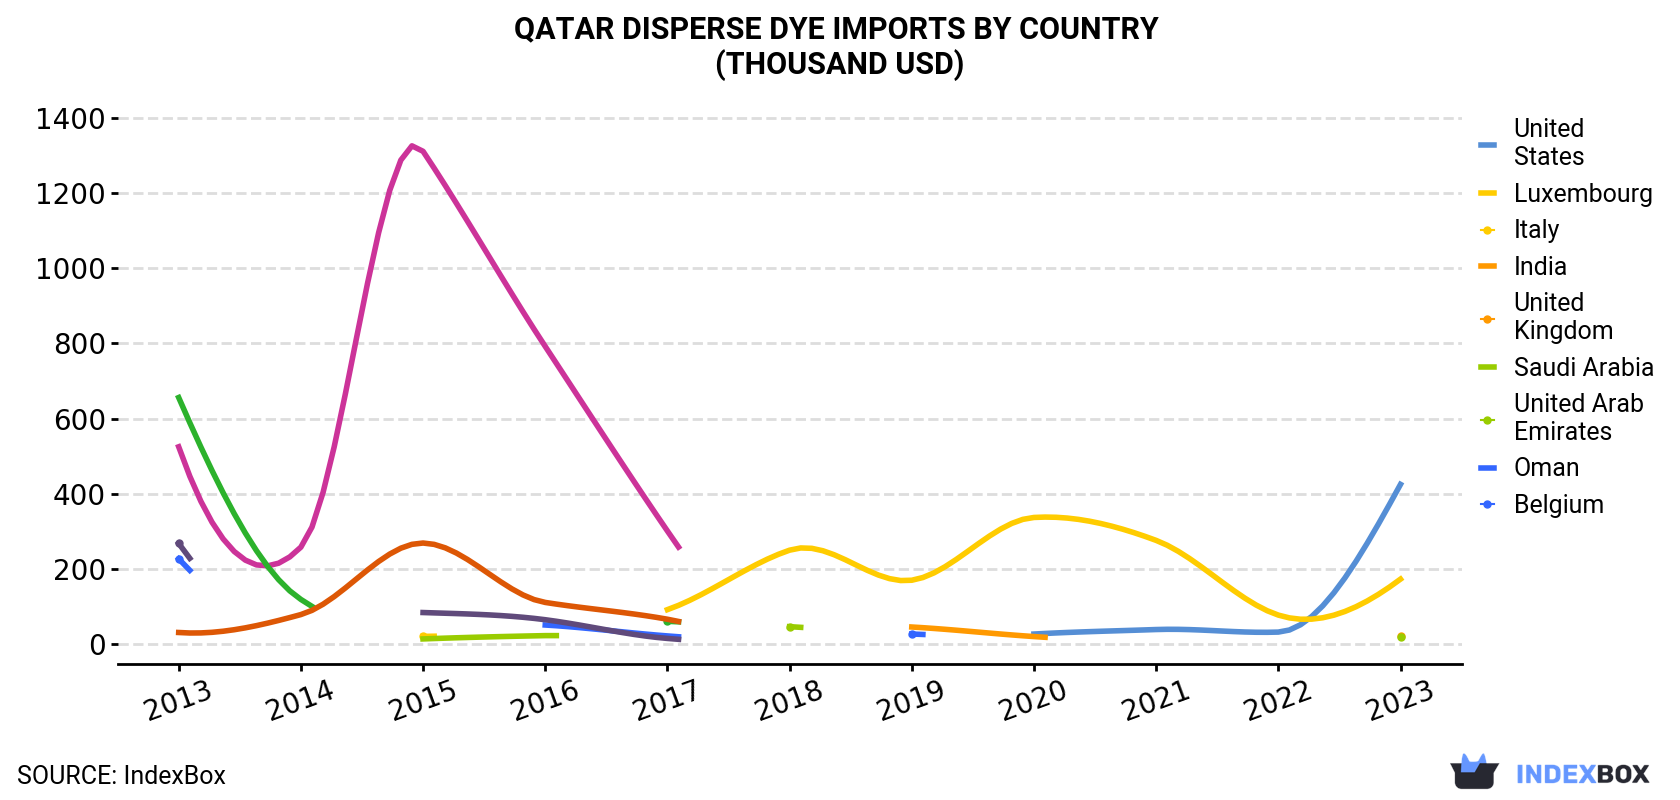 Qatar Disperse Dye Imports By Country (Thousand USD)